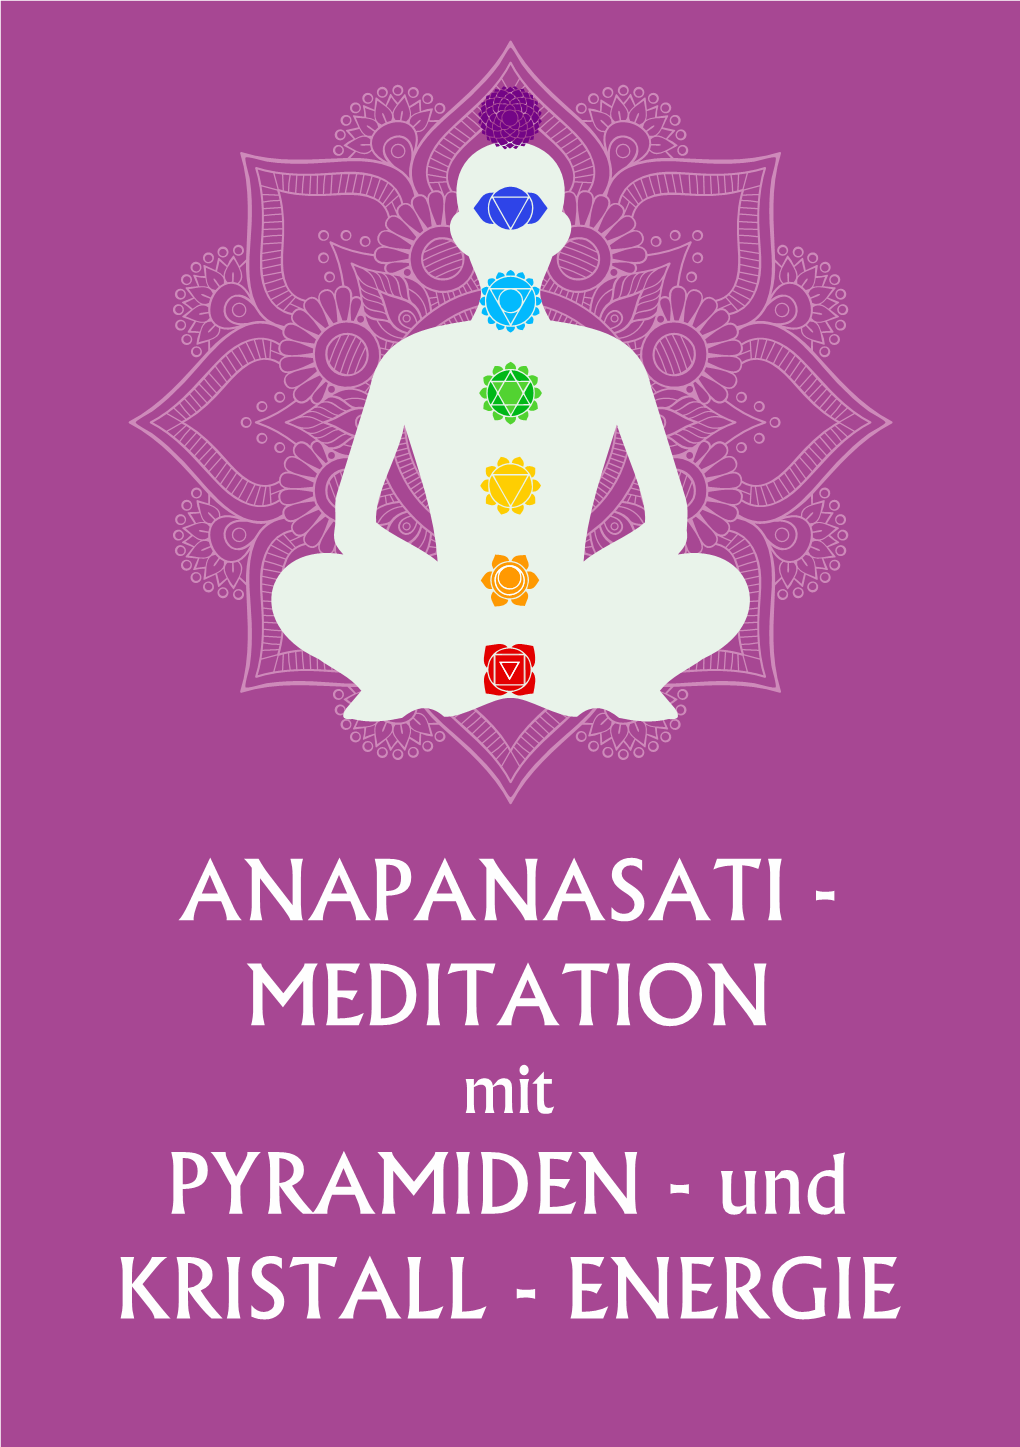 ANAPANASATI - MEDITATION Mit PYRAMIDEN - Und KRISTALL - ENERGIE for Guided Meditation Music and Other Free Downloads, Copy the Link Below